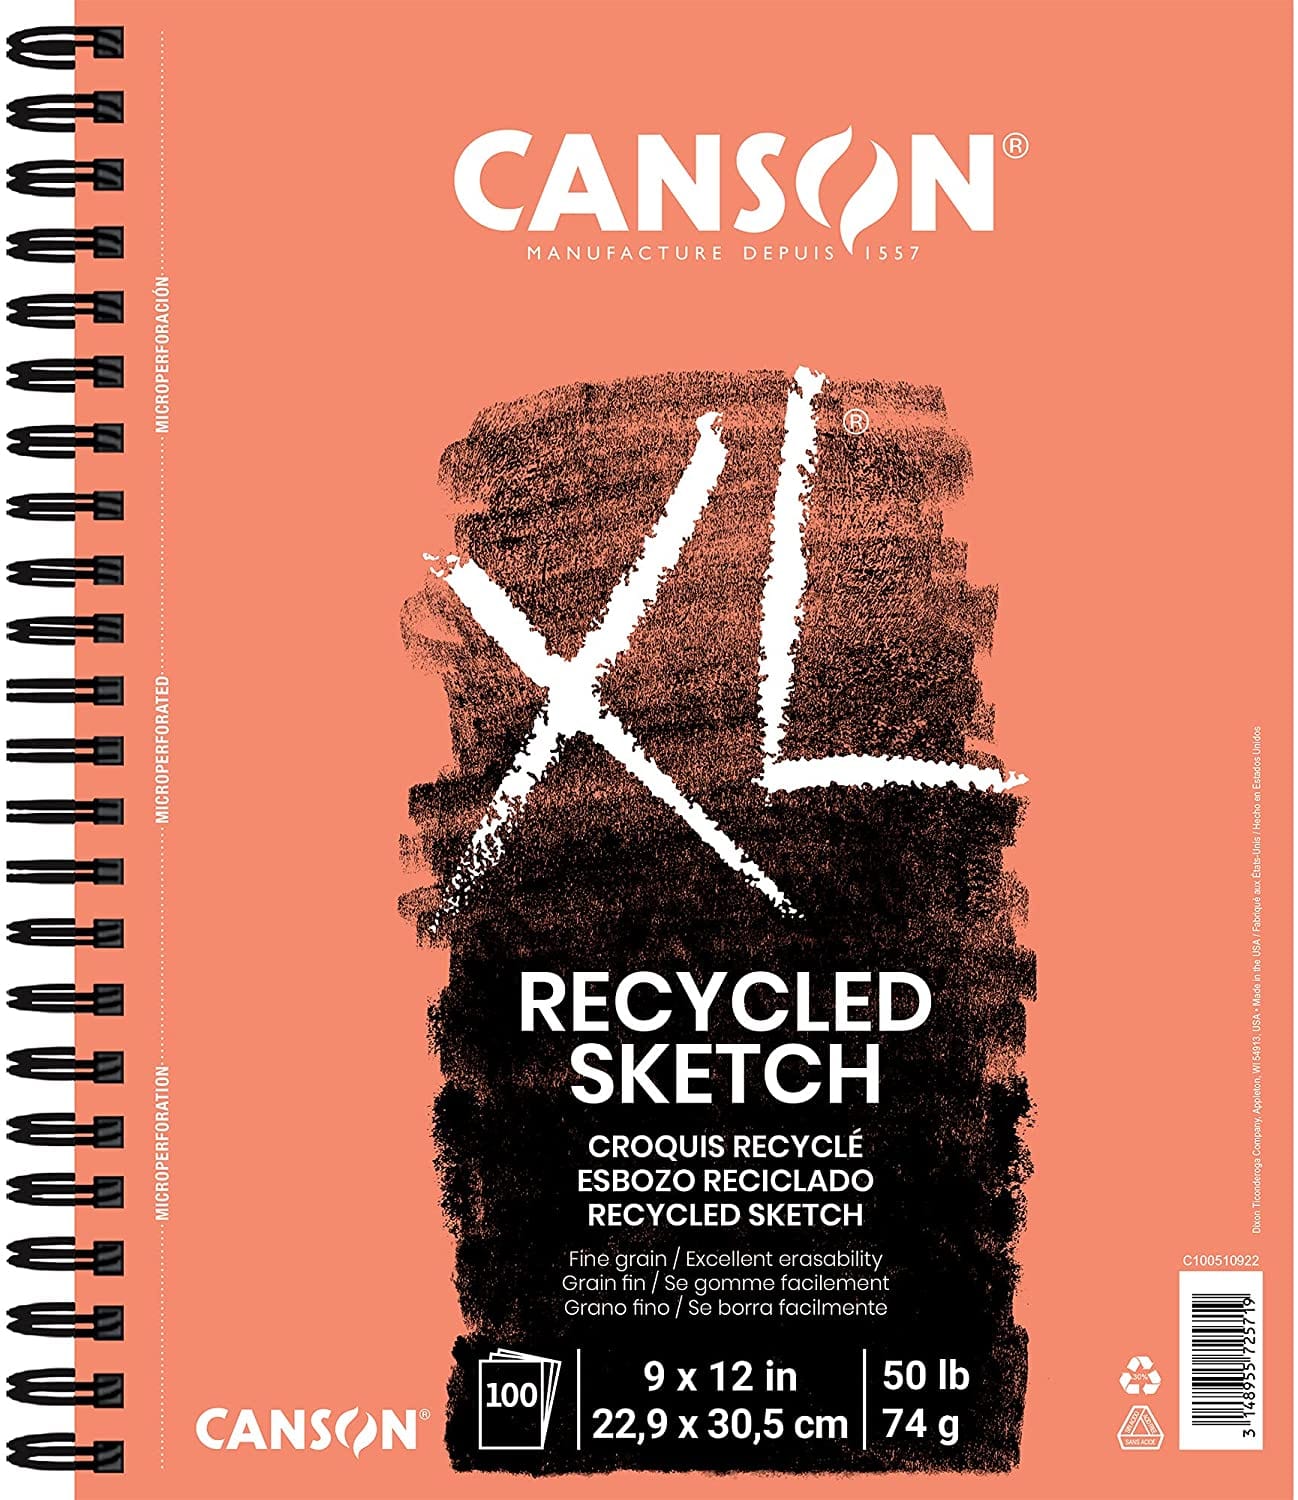 Canson Drawing Pad - Spiralbound Canson - XL - Recycled Sketch Pad - 9x12" - Side Coil - Item #100510922